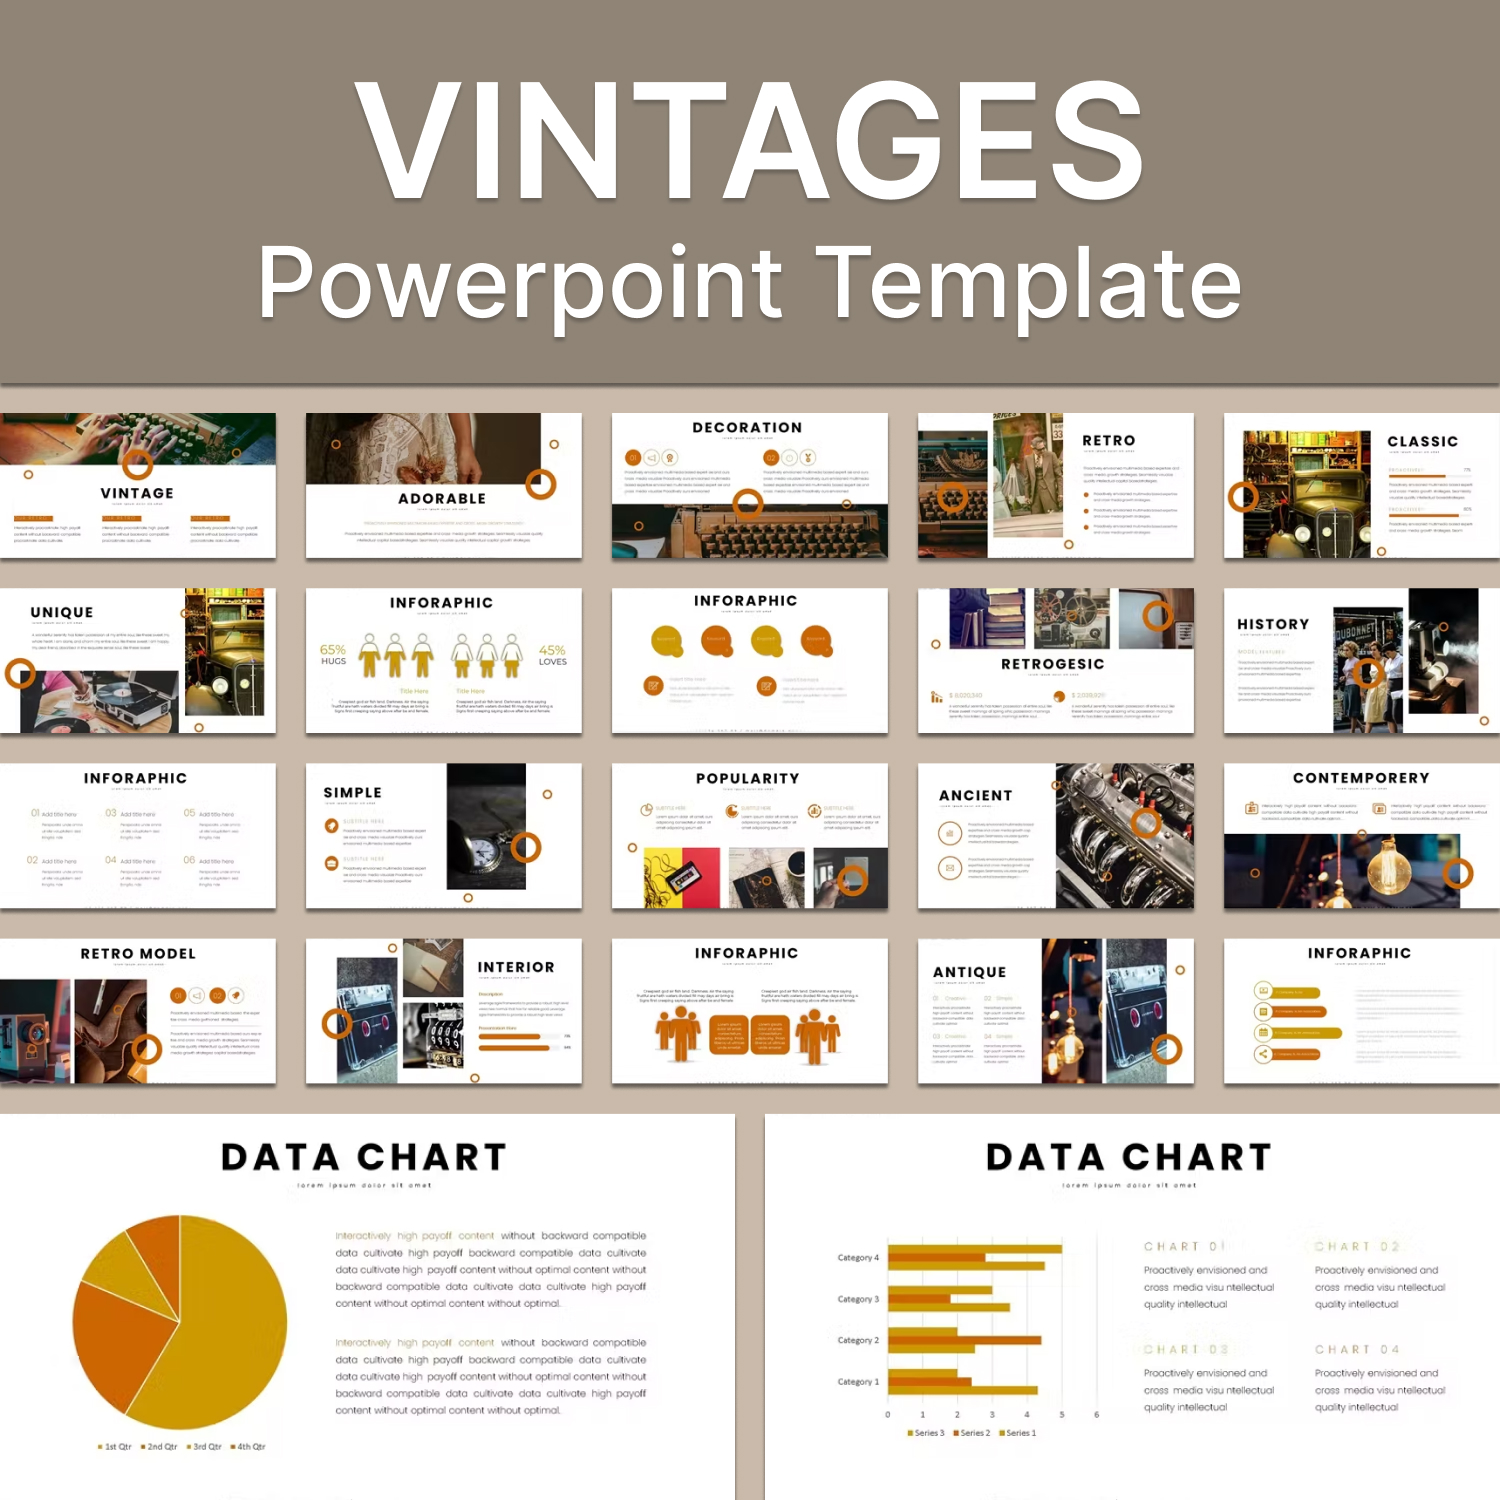 Prints of vintages powerpoint template.